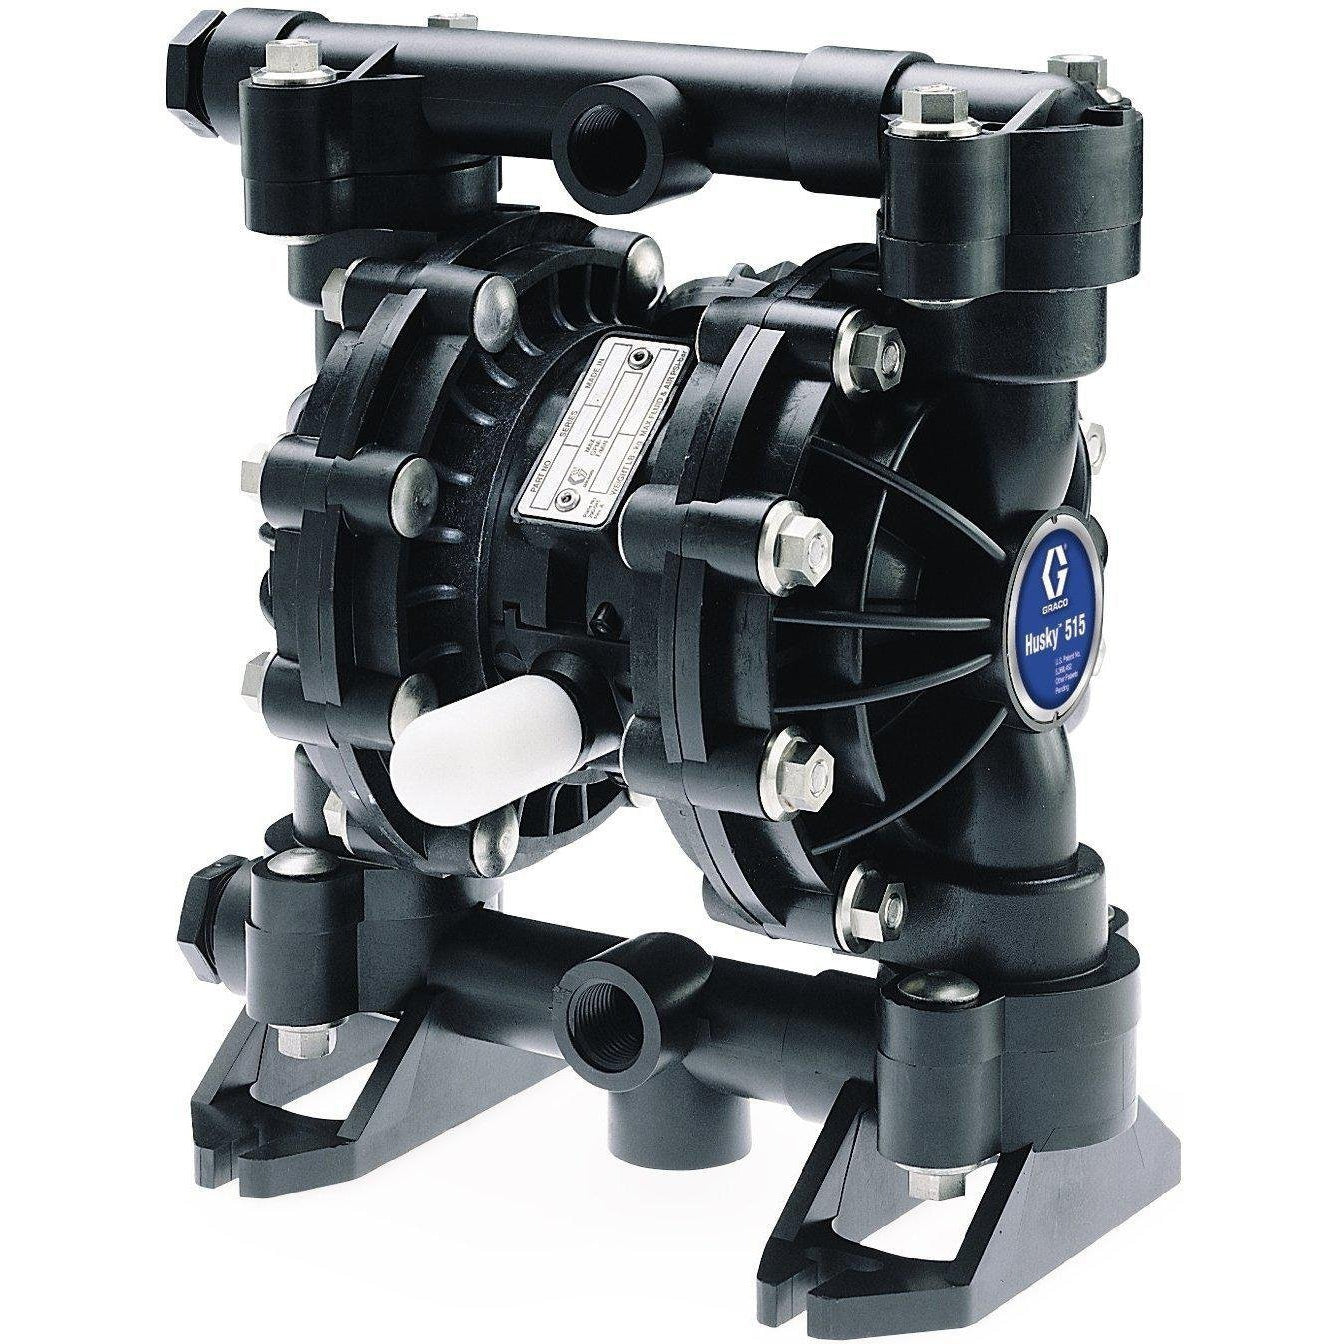 Graco 243669 Husky 515 Series Air-Operated Double Diaphragm Transfer Pump For 50/50 Windshield Wash Solution, Water, Anti-Freeze - Fireball Equipment Ltd.